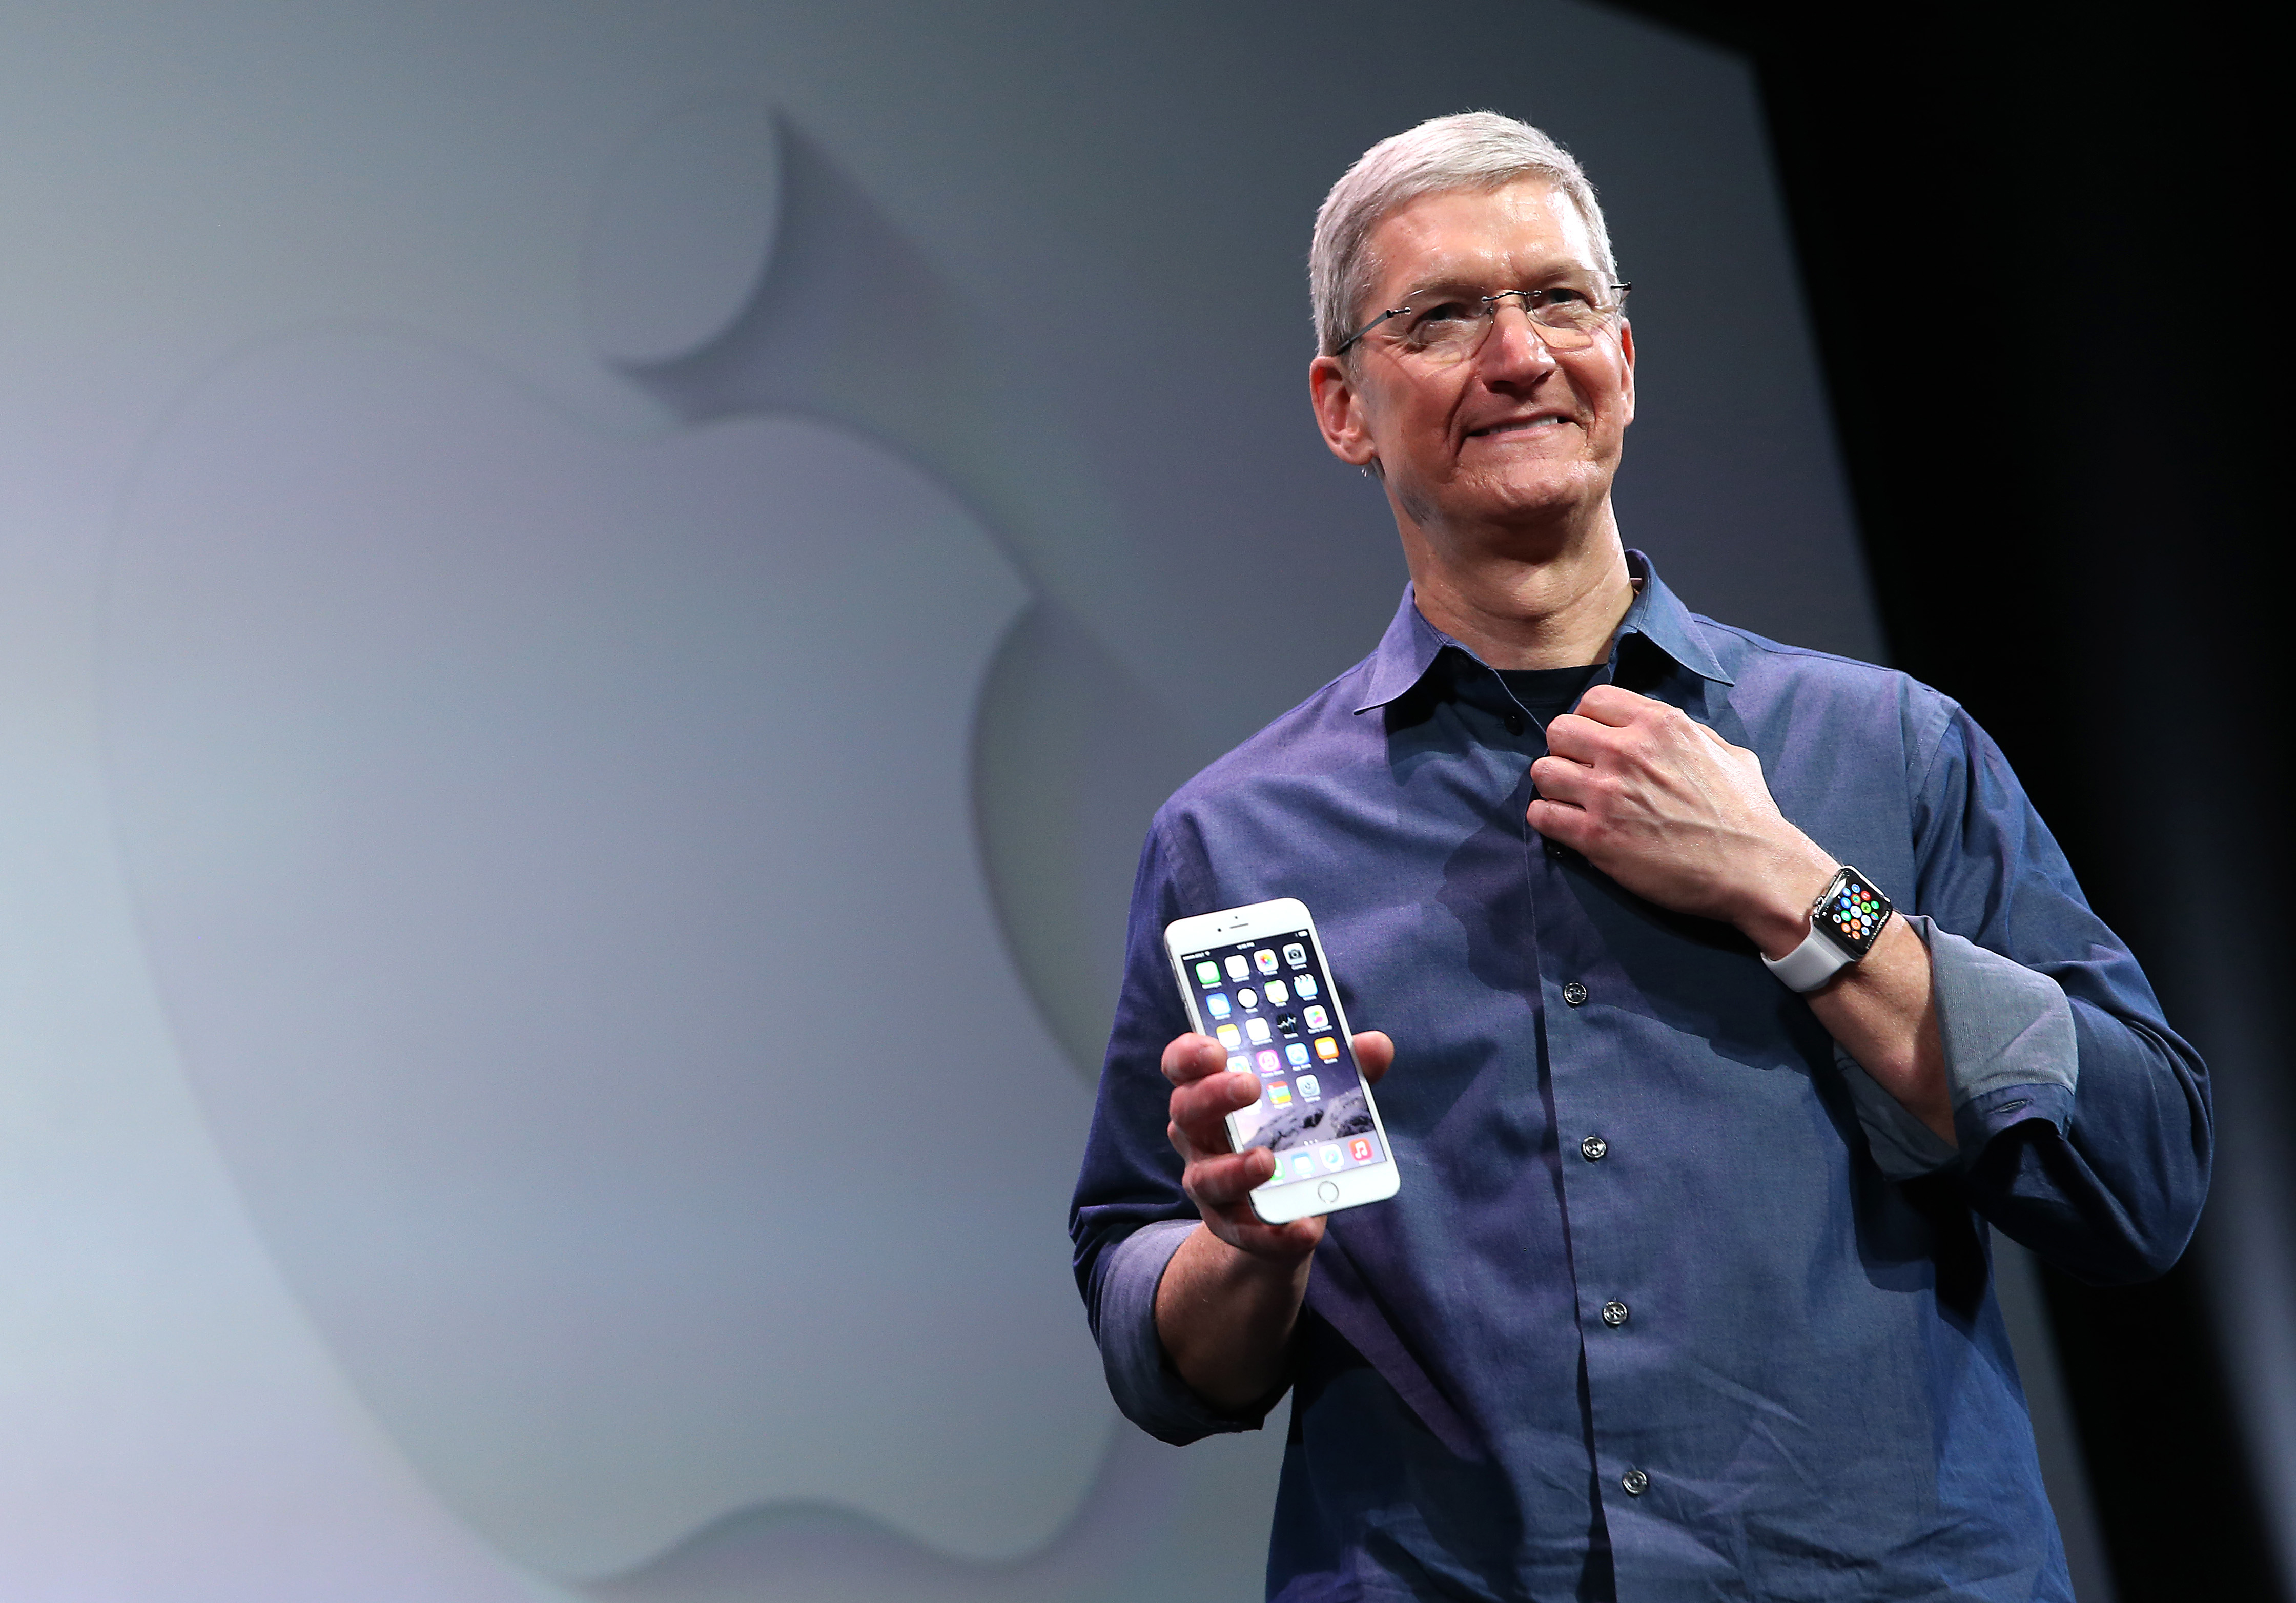 Apple CEO Tim Cook shows off the new iPhone 6 and the Apple Watch during an Apple special event at the Flint Center for the Performing Arts on September 9, 2014 in Cupertino, Calif. (Justin Sullivan—Getty Images)